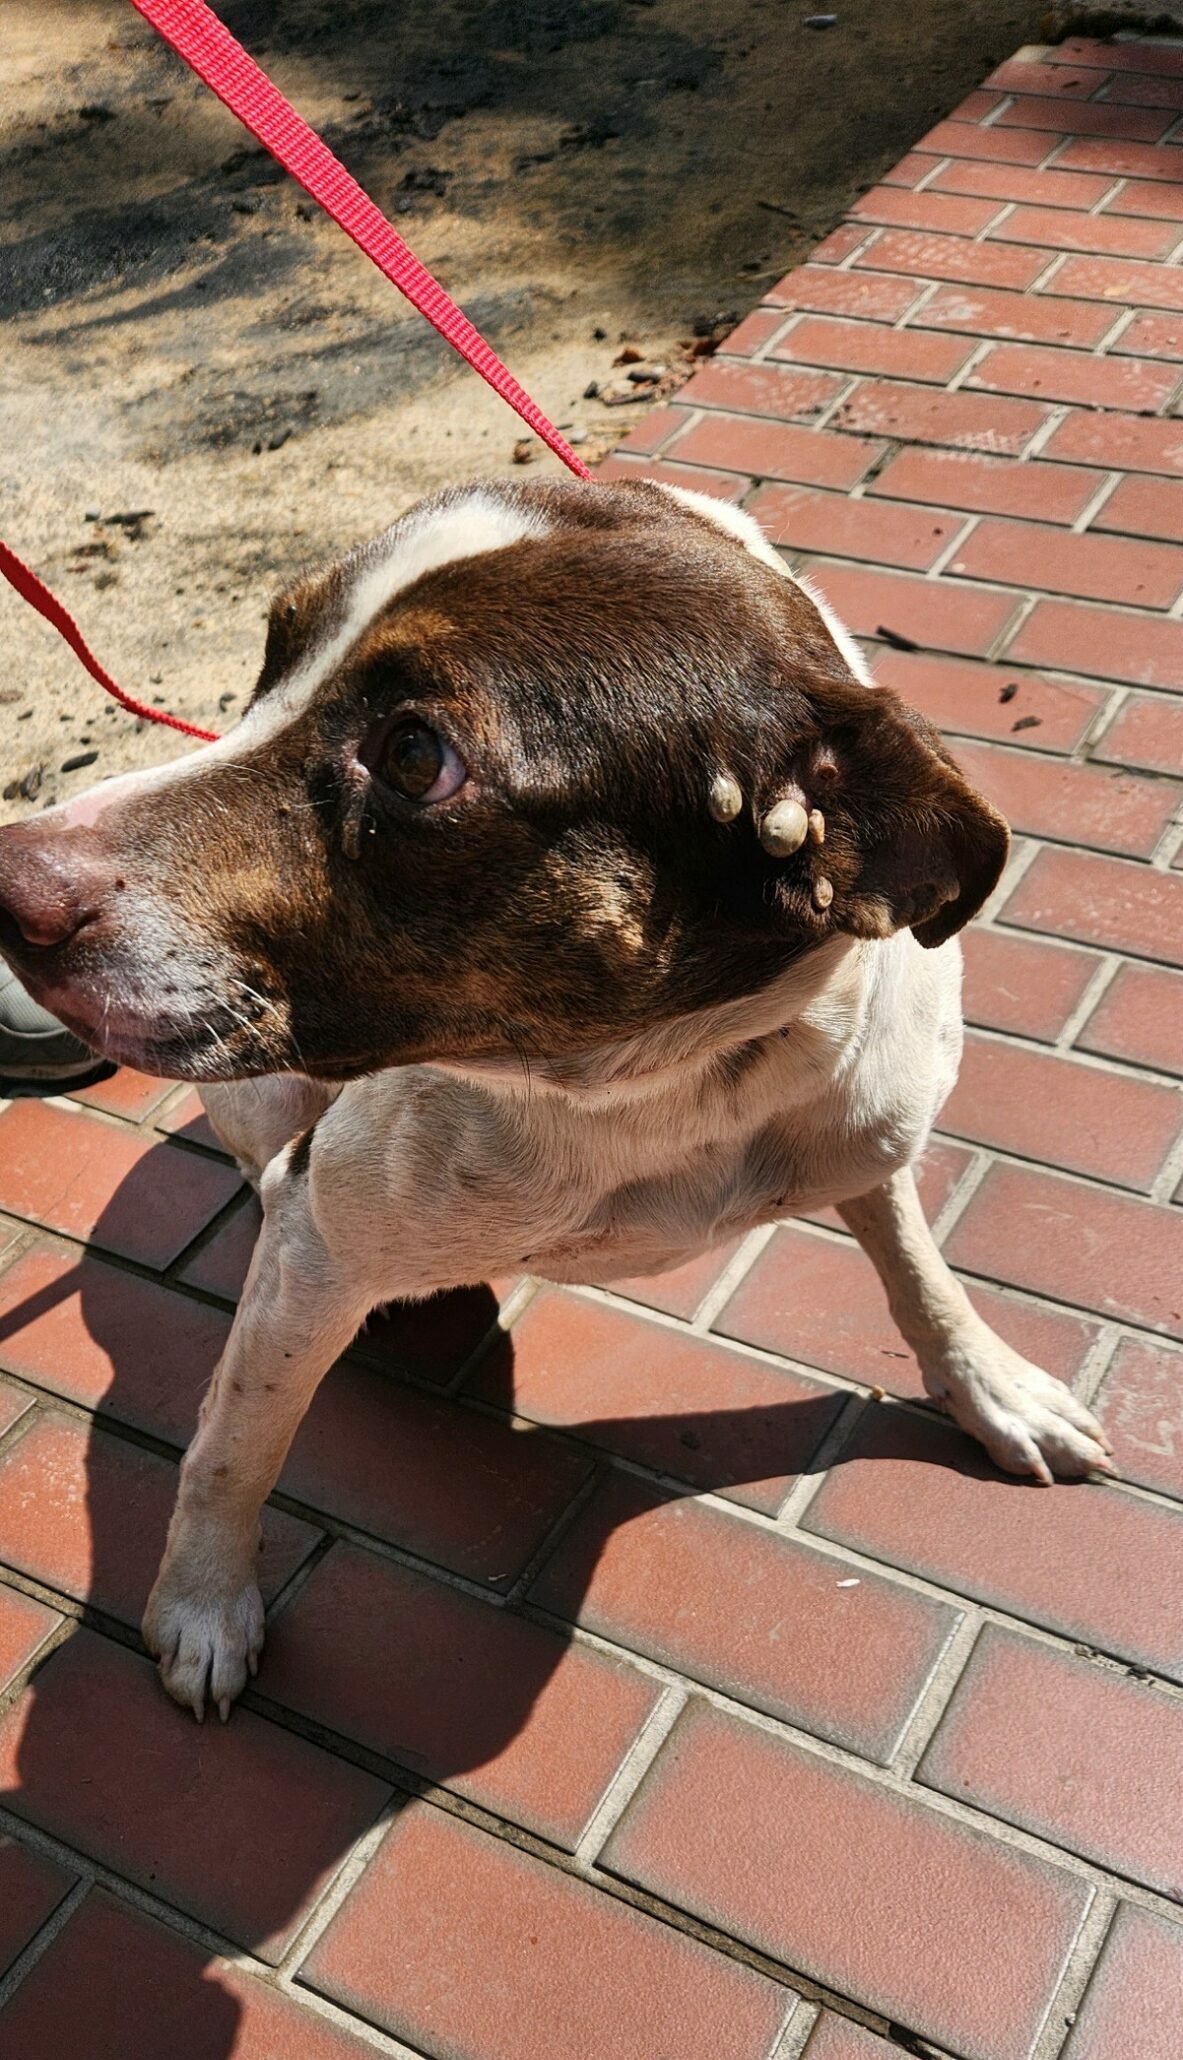 A small spotted dog with a wounded ear stands on a brick path during the emergency rescue.